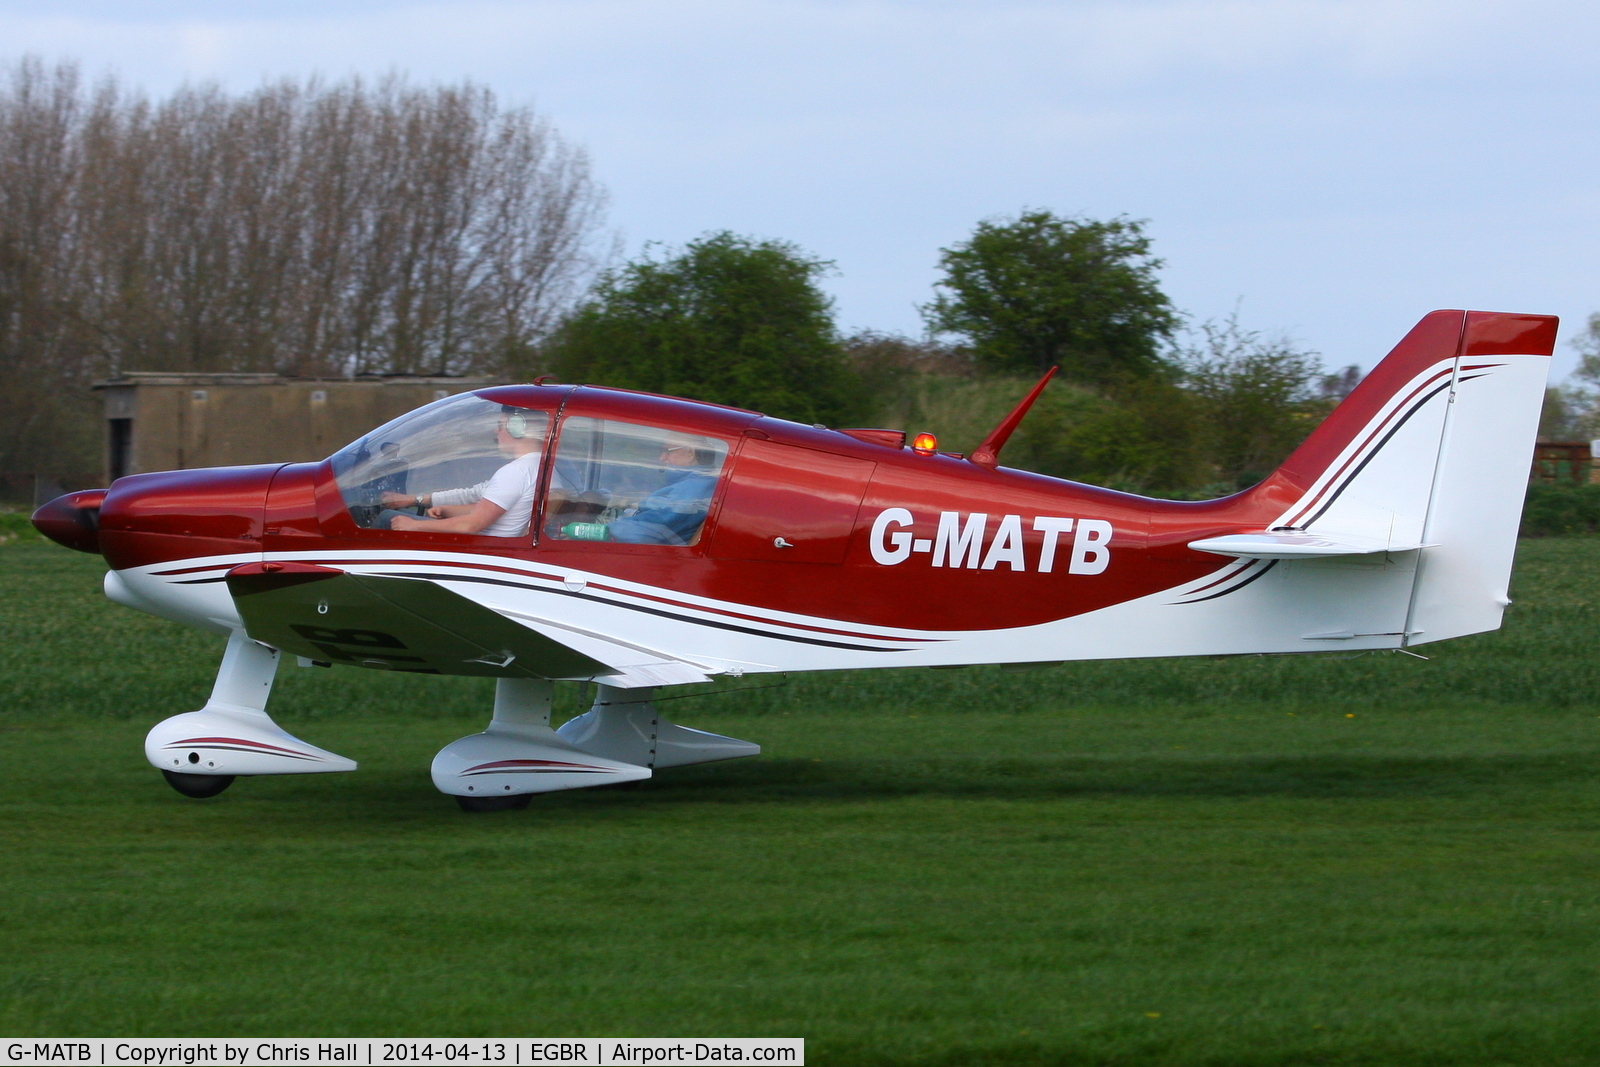 G-MATB, 1972 Robin DR-400-160 Chevalier C/N 735, at Breighton's 'Early Bird' Fly-in 13/04/14